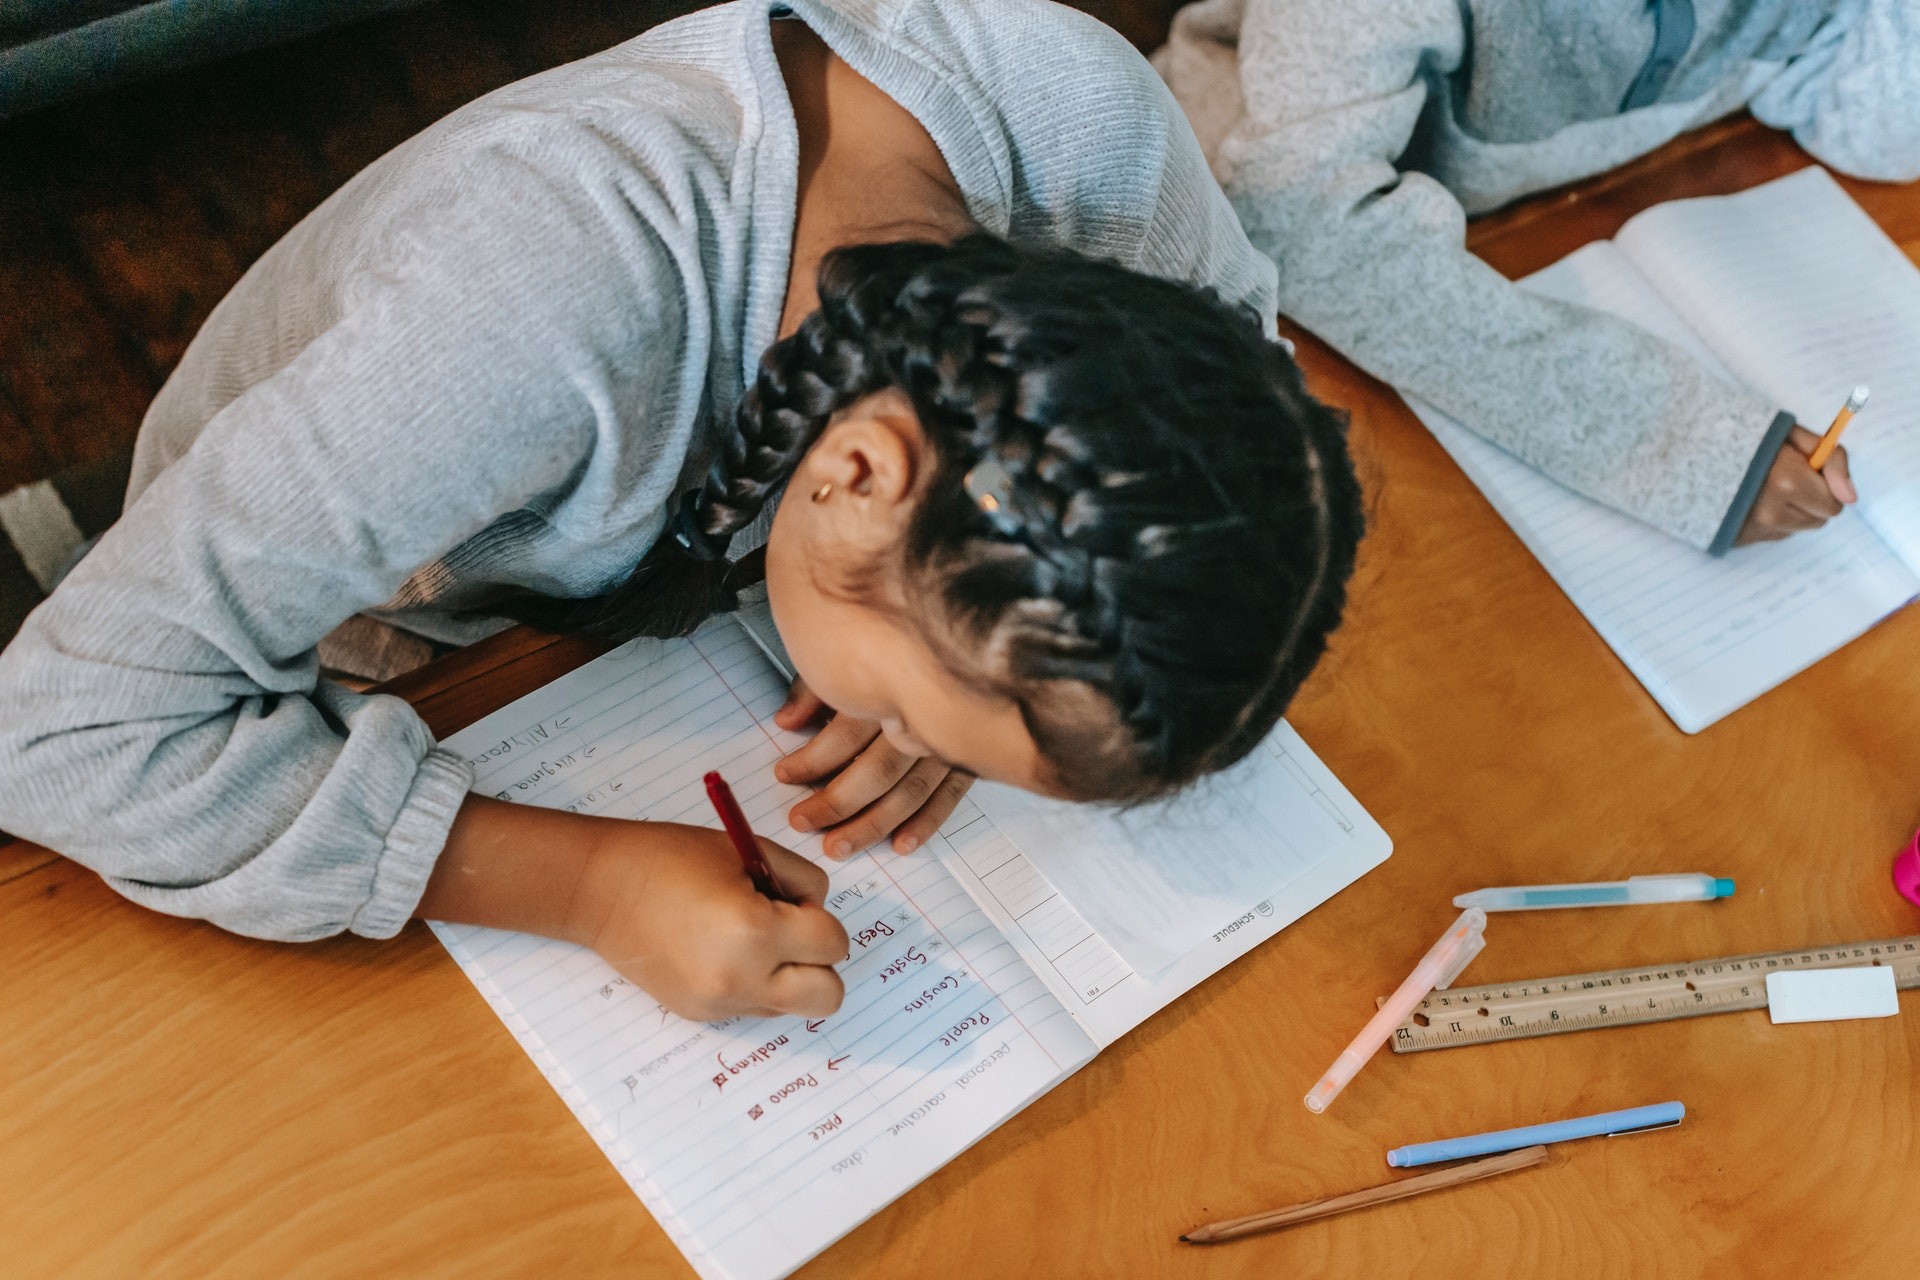 Top-down photograph of a girl with braids sitting at a desk next to another student and writing in a notebook.